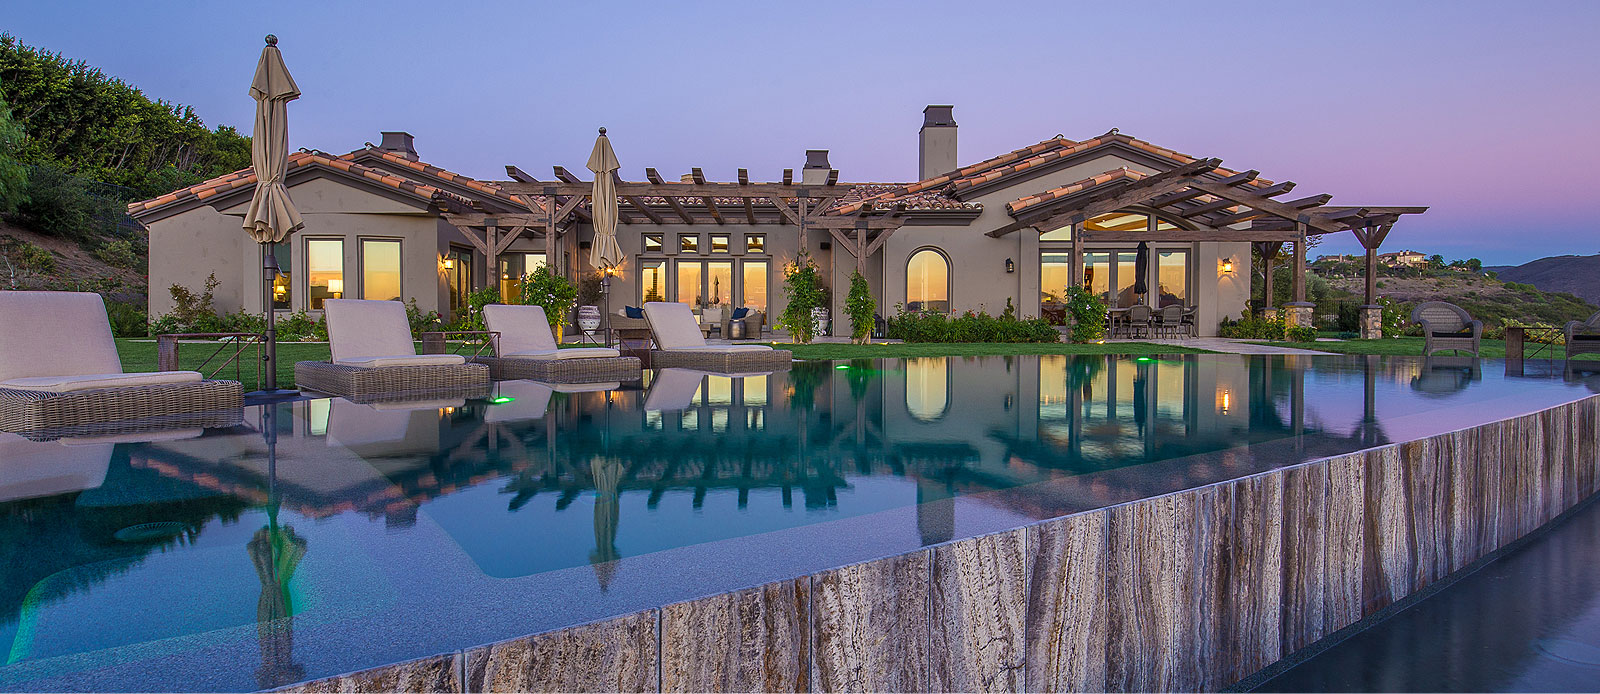 Luxury home with swimming pool